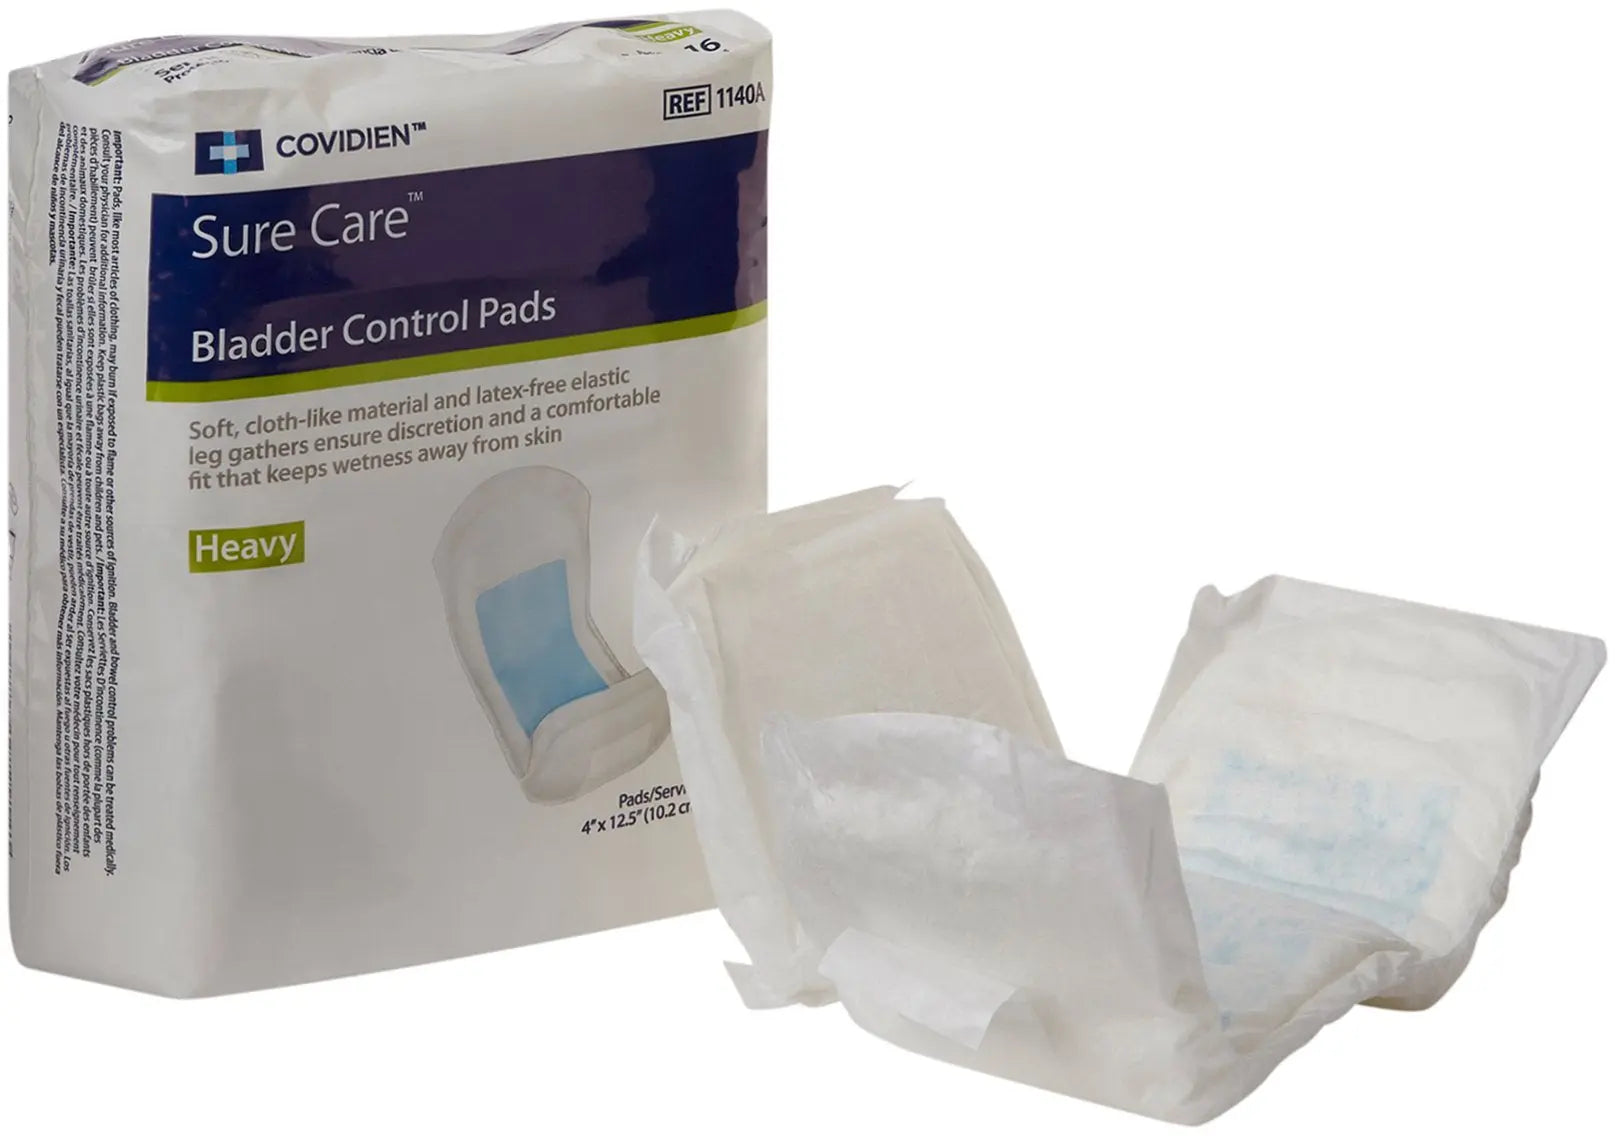 Sure Care Bladder Control Pad - 4 x 10-3/4 - Pack of 20